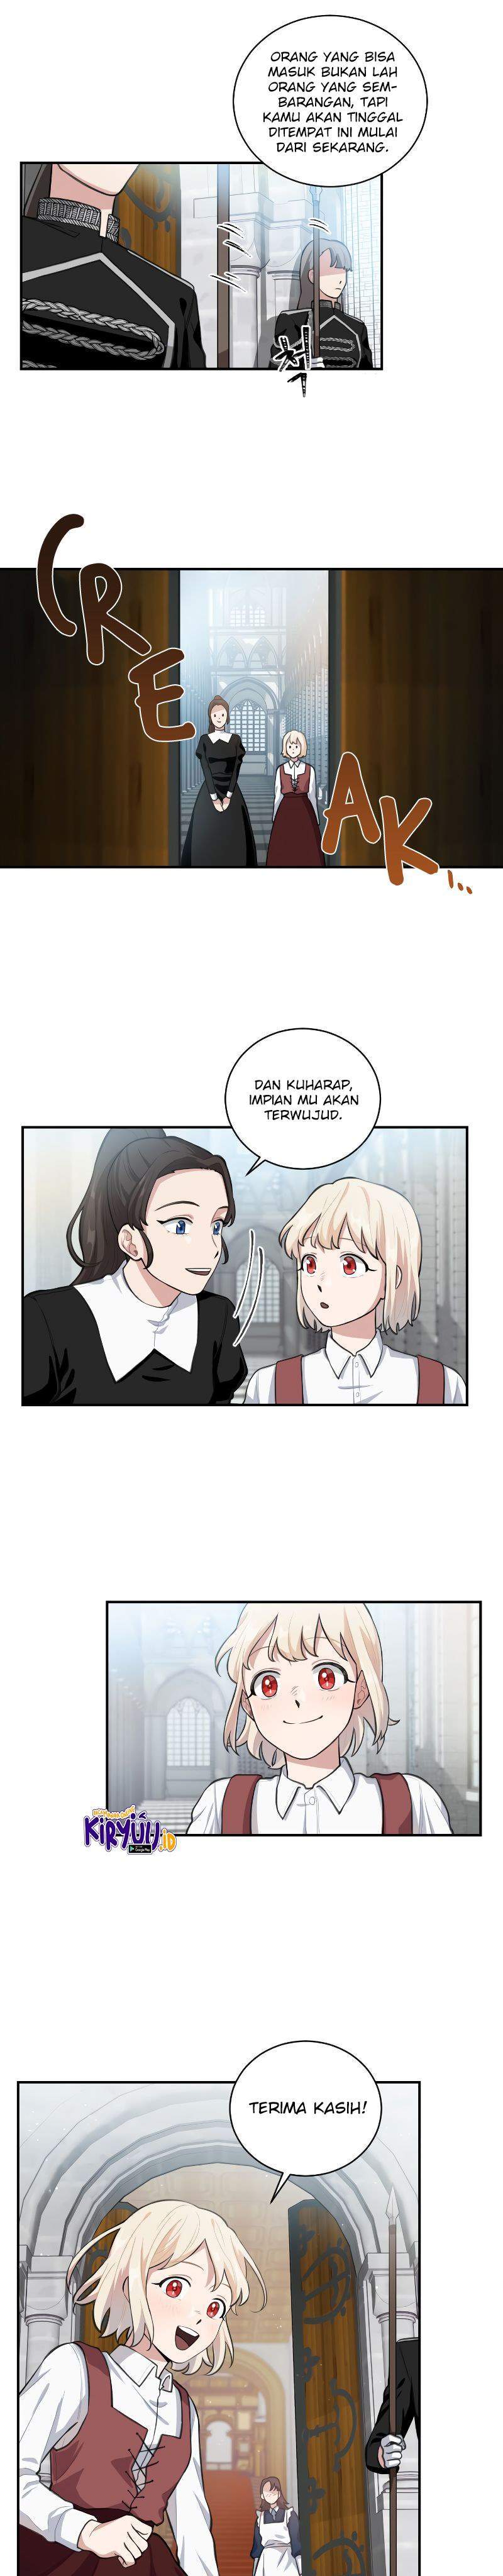 I Became a Maid in a TL Novel Chapter 3 6